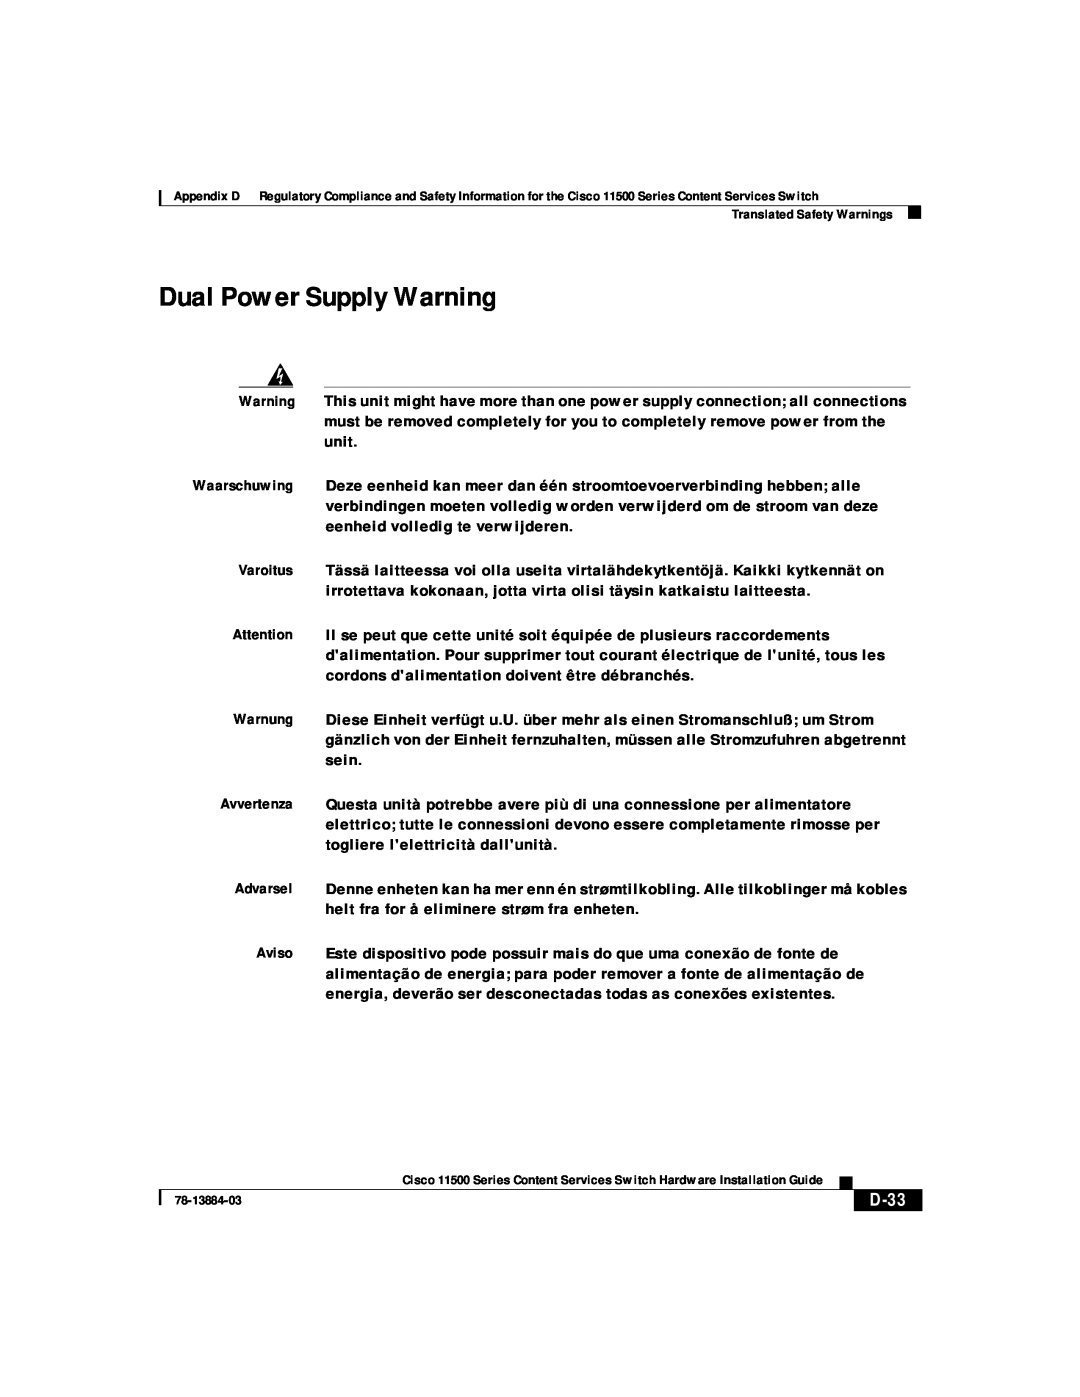 Cisco Systems 11500 Series manual Dual Power Supply Warning, D-33 